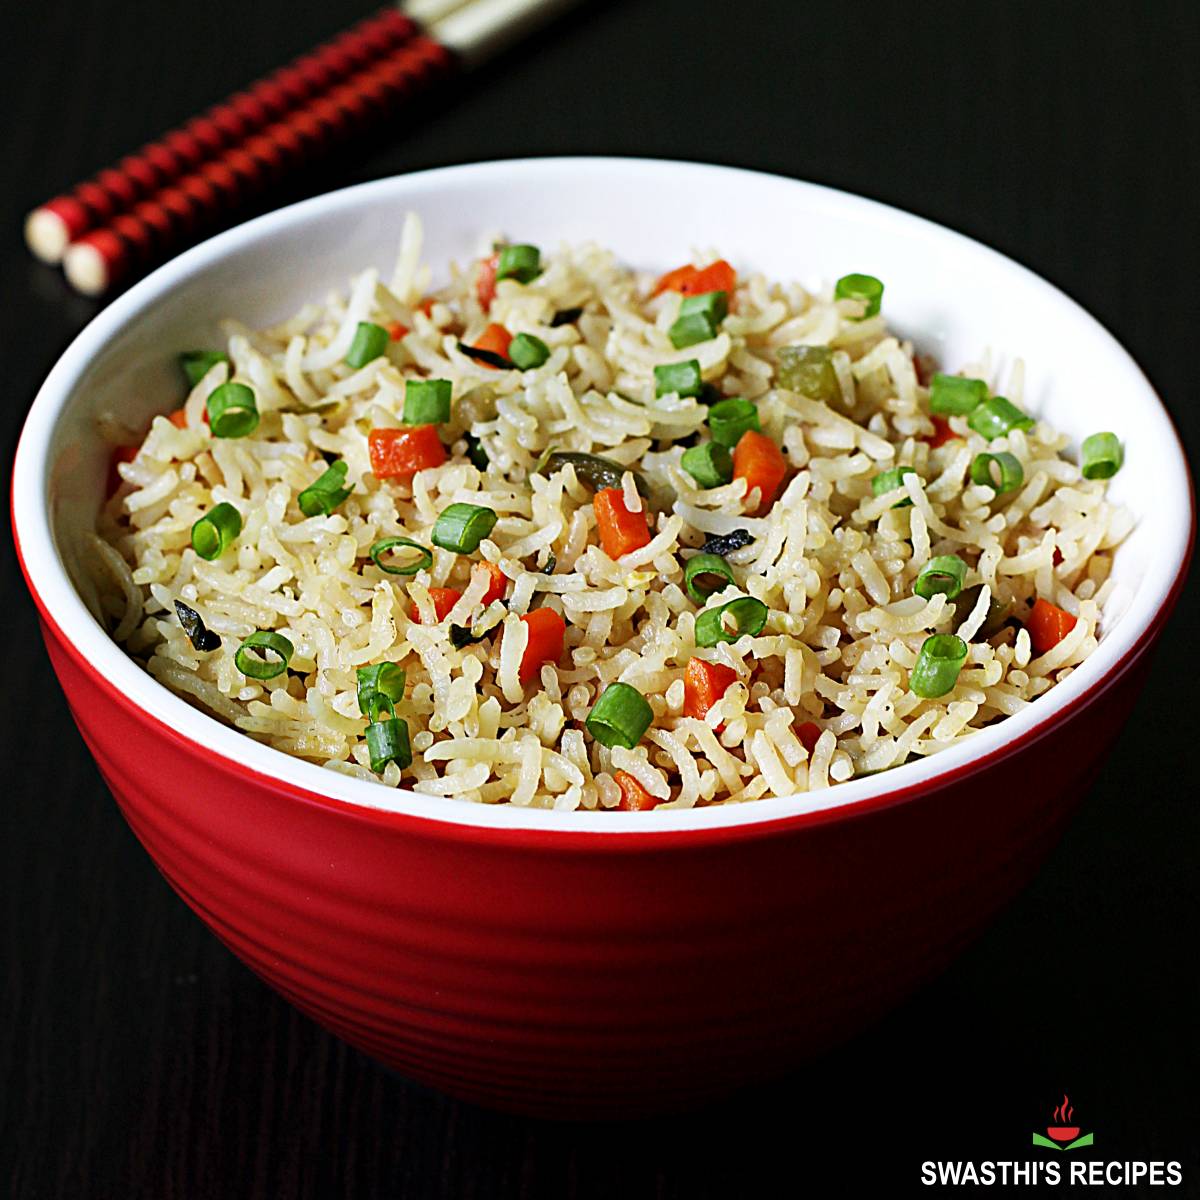 How to perfect your fried rice: Tips for drying rice.